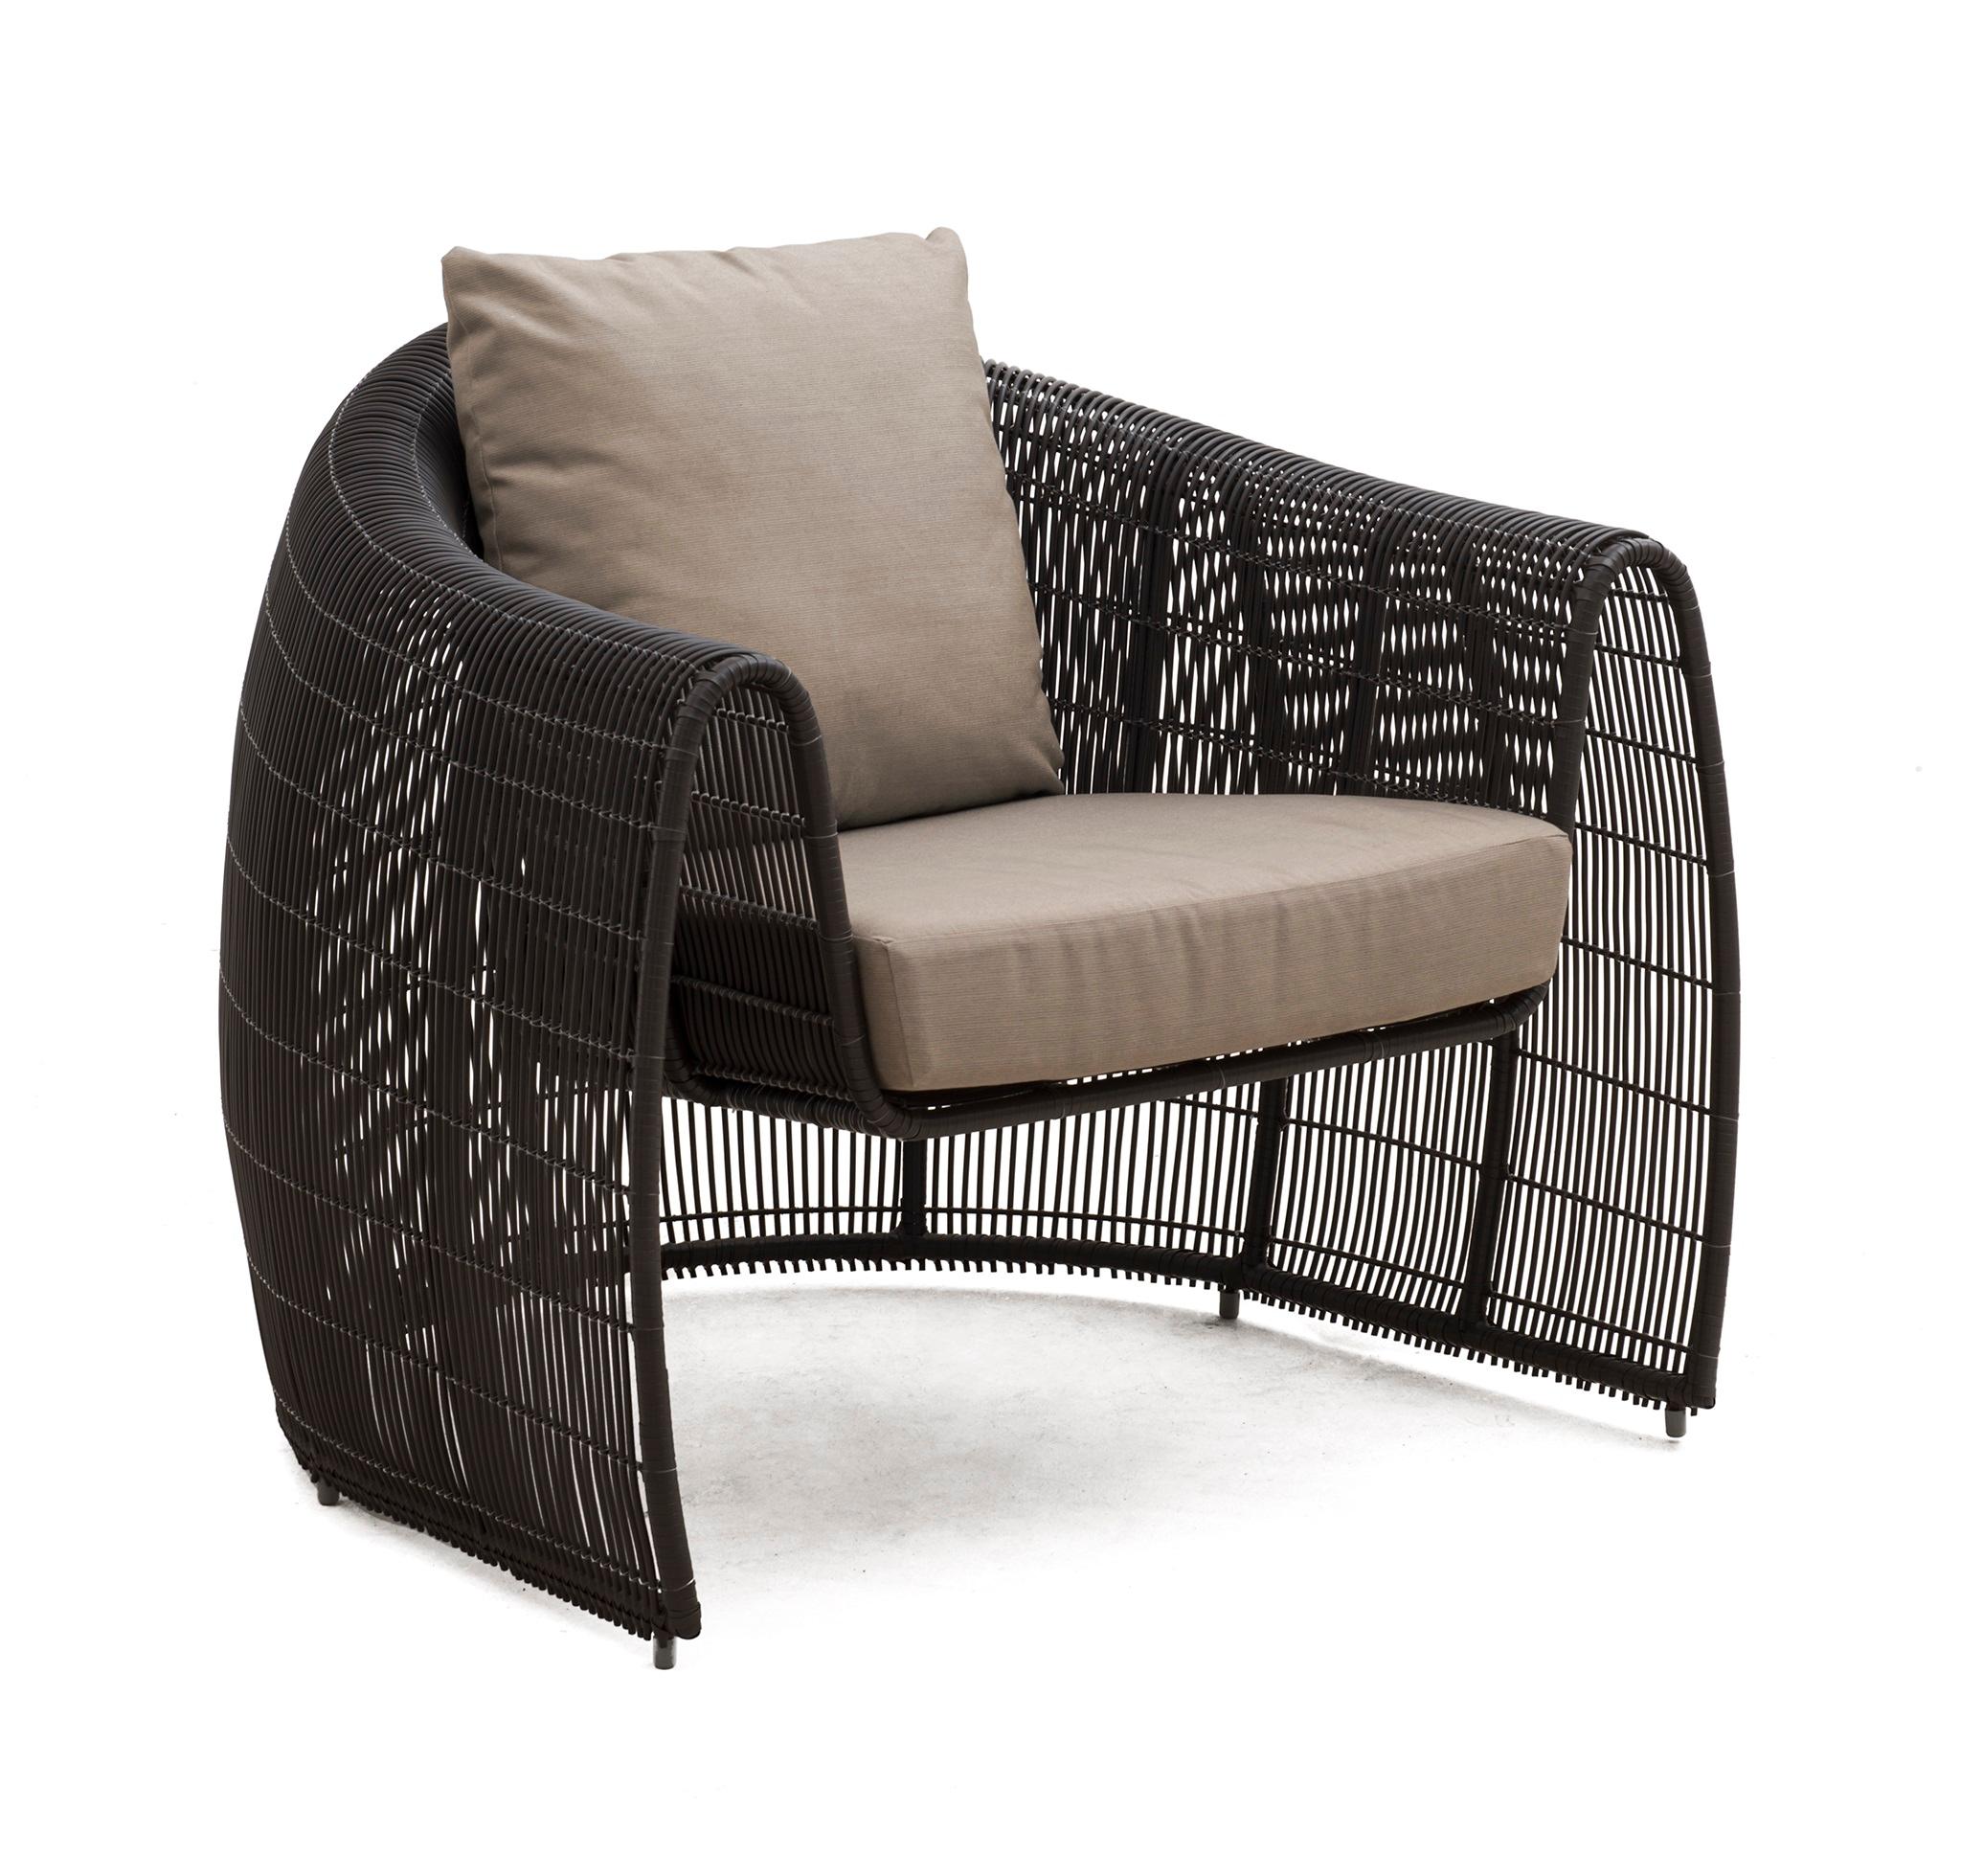 Outdoor Lulu Easy armchair by Kenneth Cobonpue
Materials: Polyethelene, Steel. 
Also available in other colors and for indoors.
Dimensions: 87.5 cm x 90 cm x H 76 cm

Lulu adds grace to any space with its clean, nest-like silhouette. Its open